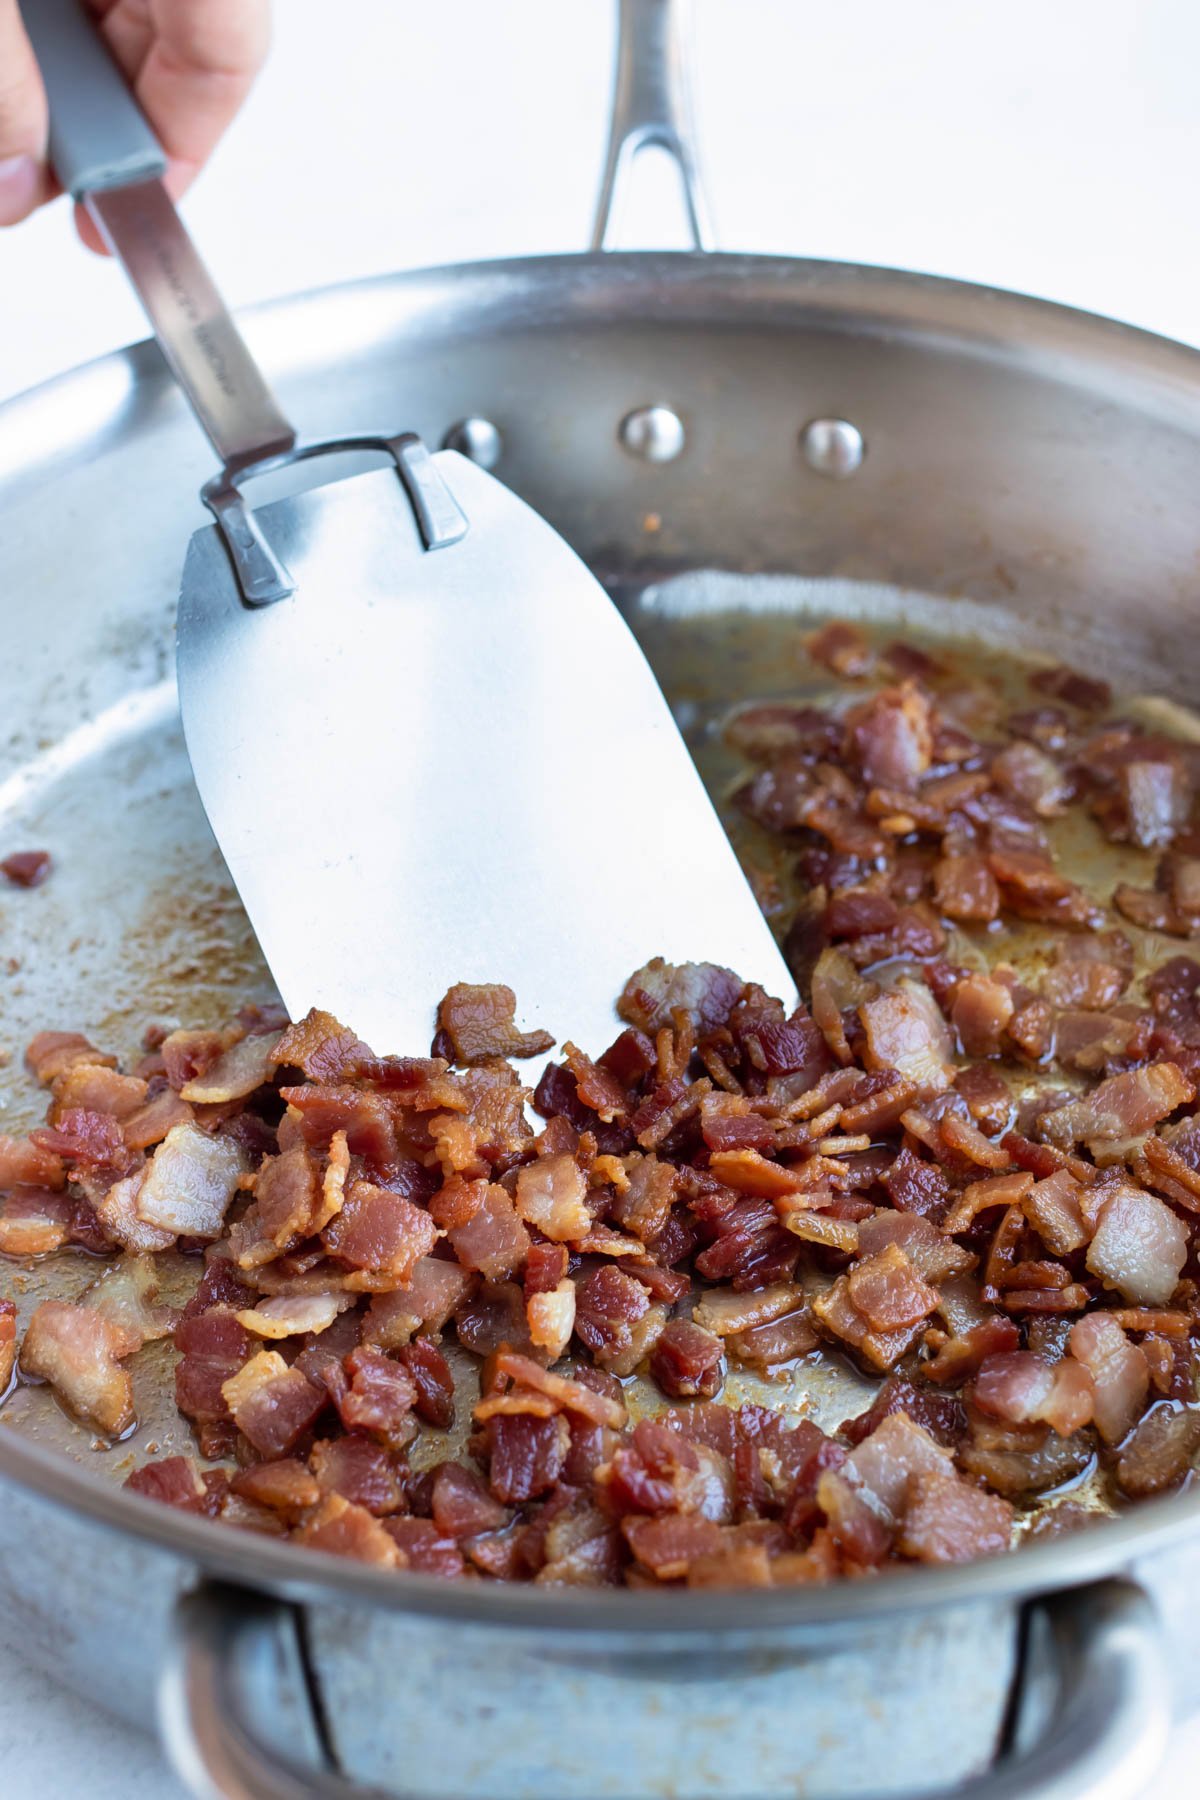 Cook bacon in a skillet until perfectly crispy.